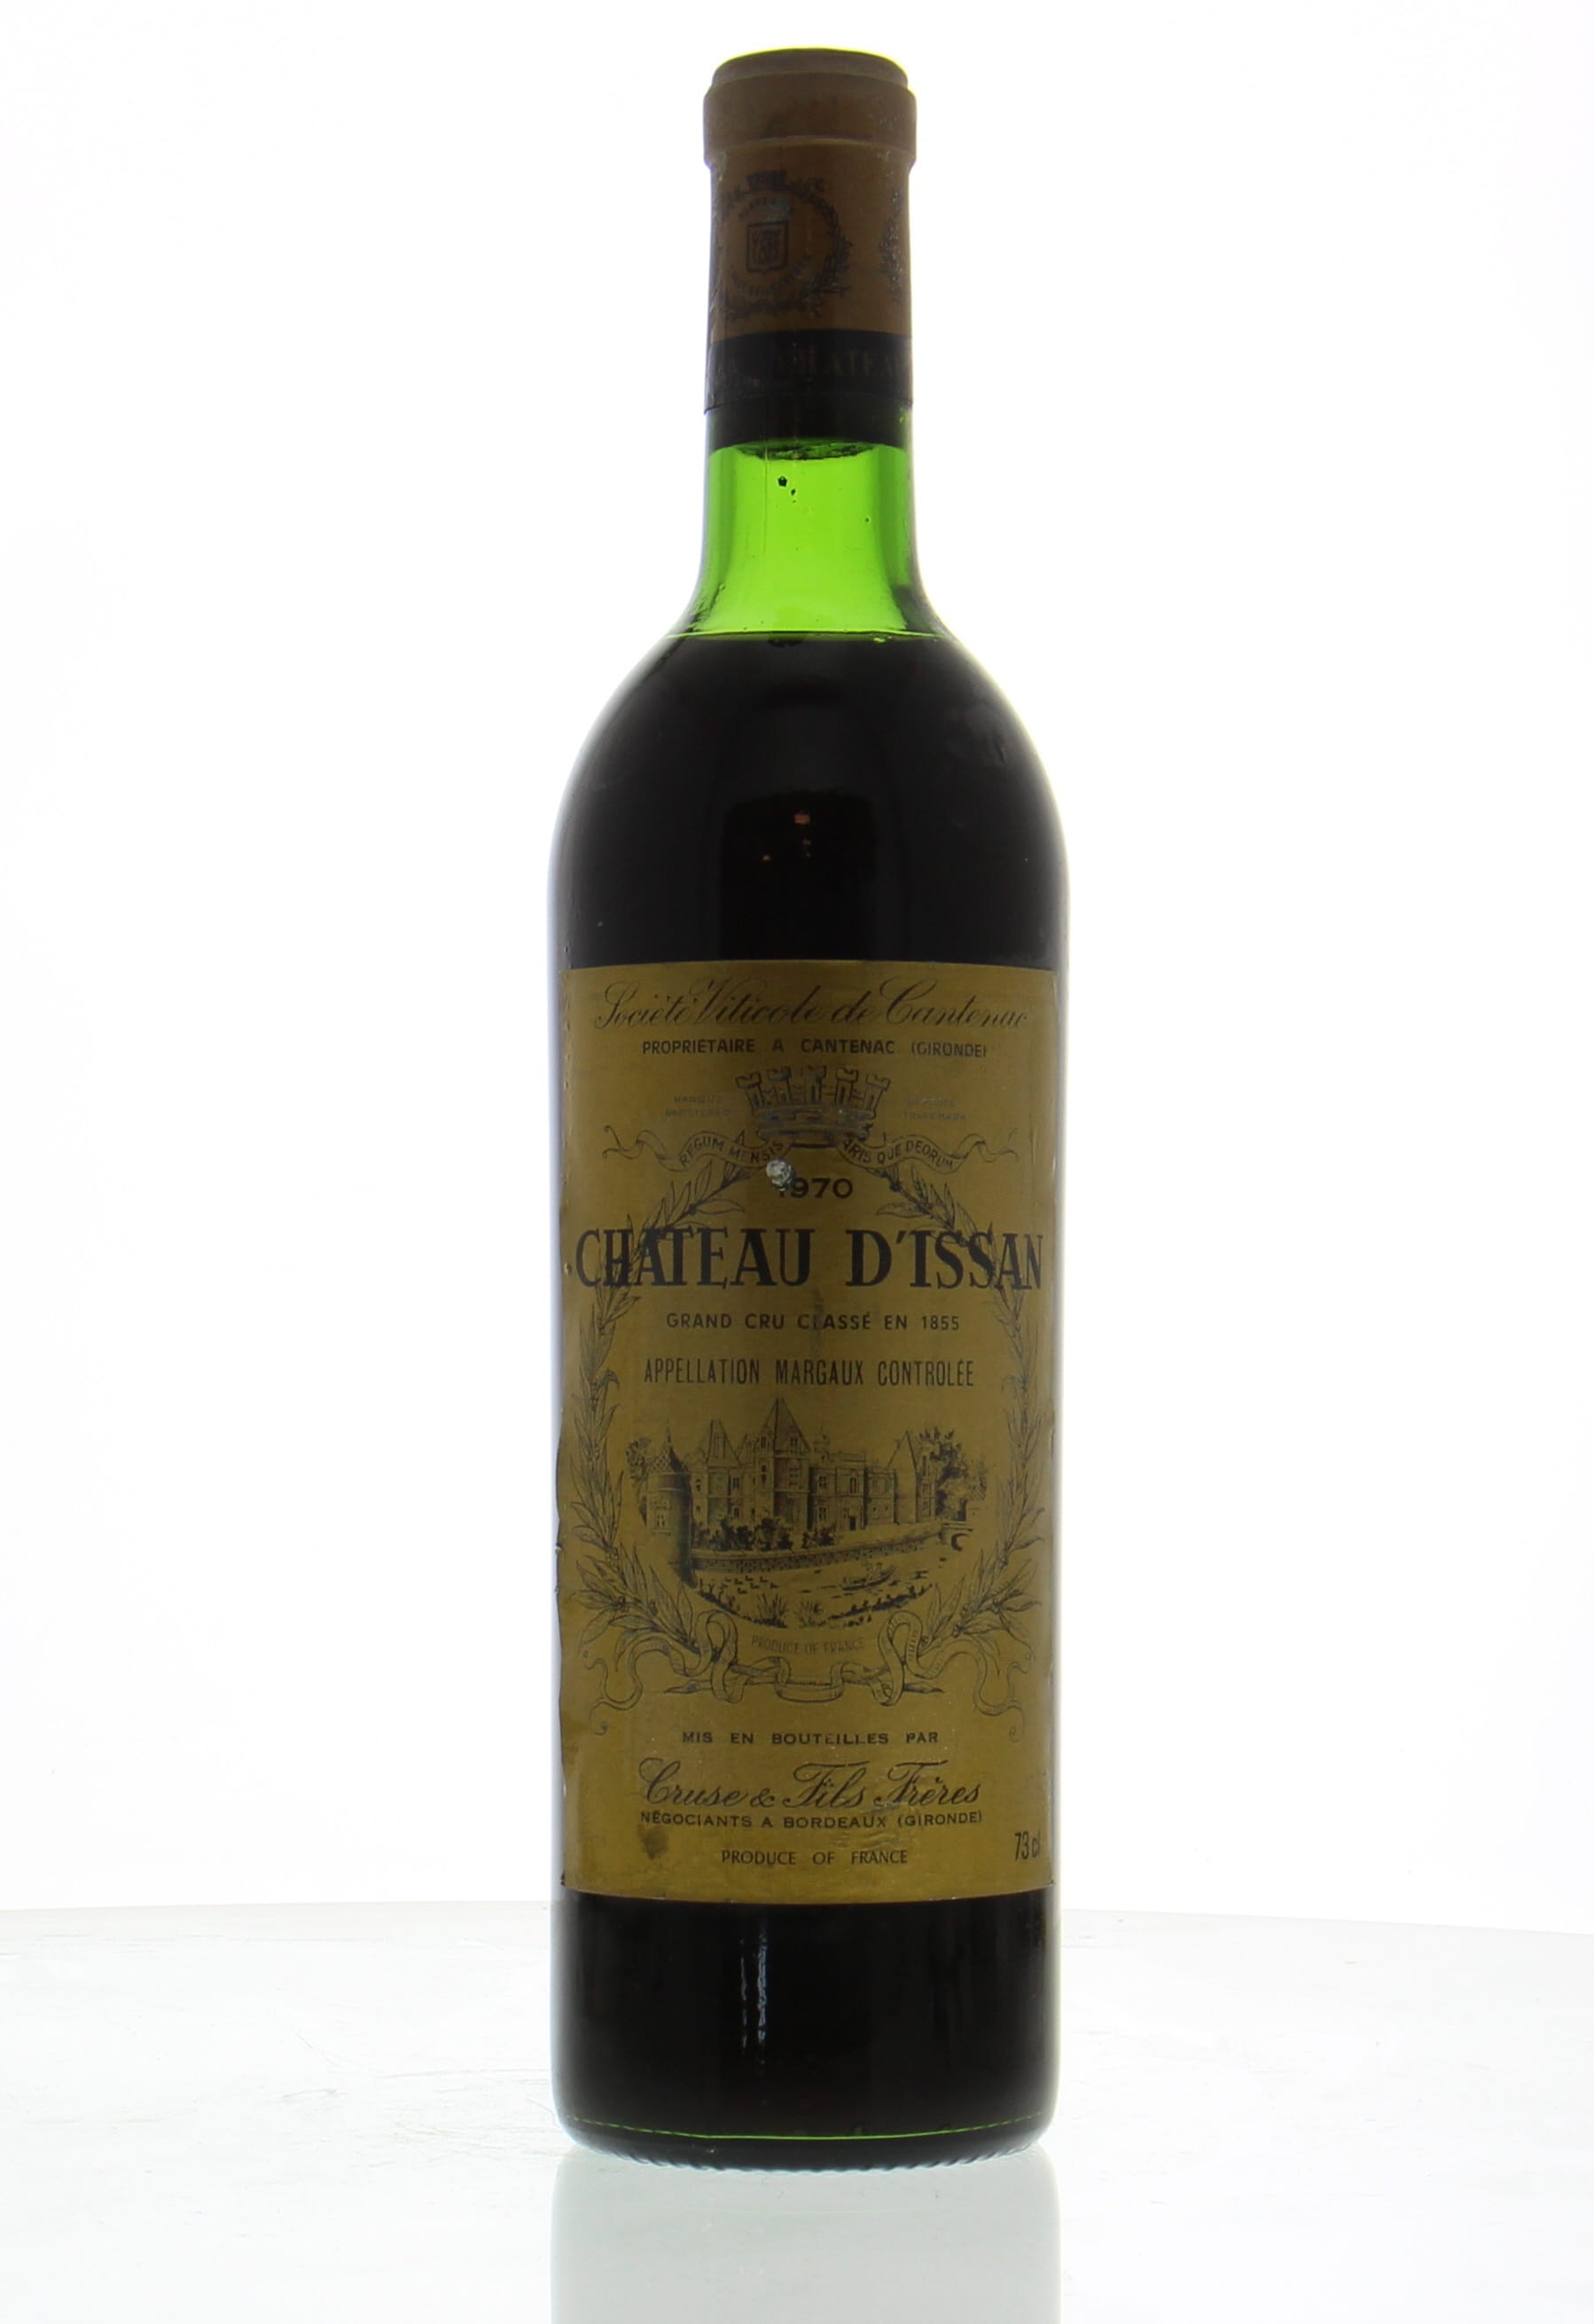 Chateau D'Issan - Chateau D'Issan 1970 Top Shoulder